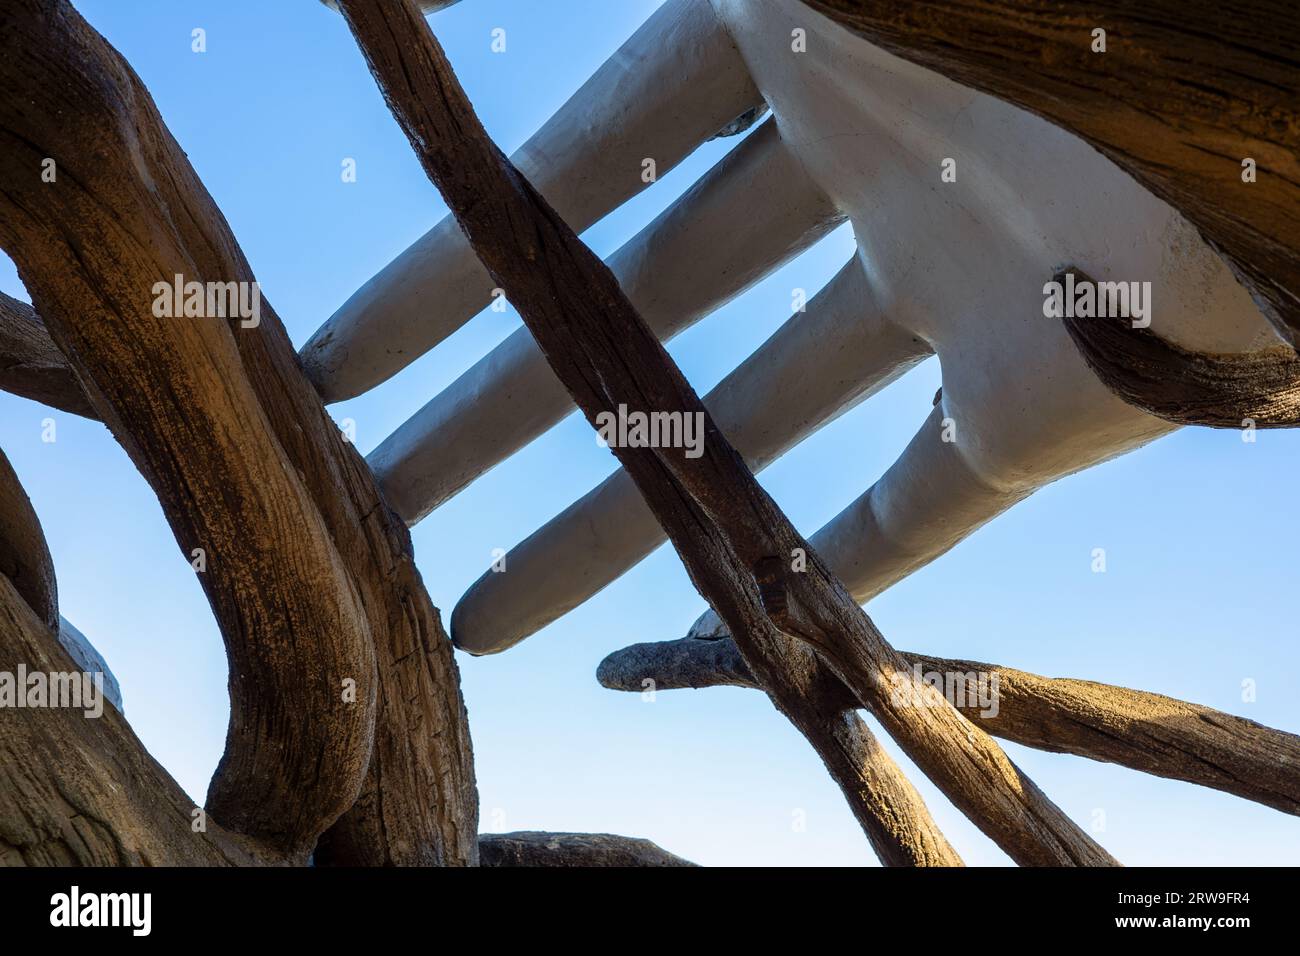 Aurora, Colorado - September 13, 2023: Close-up detail view of Daniel Popper's 21-foot-tall 'Umi' sculpture unveiled in The Aurora Highlands Stock Photo